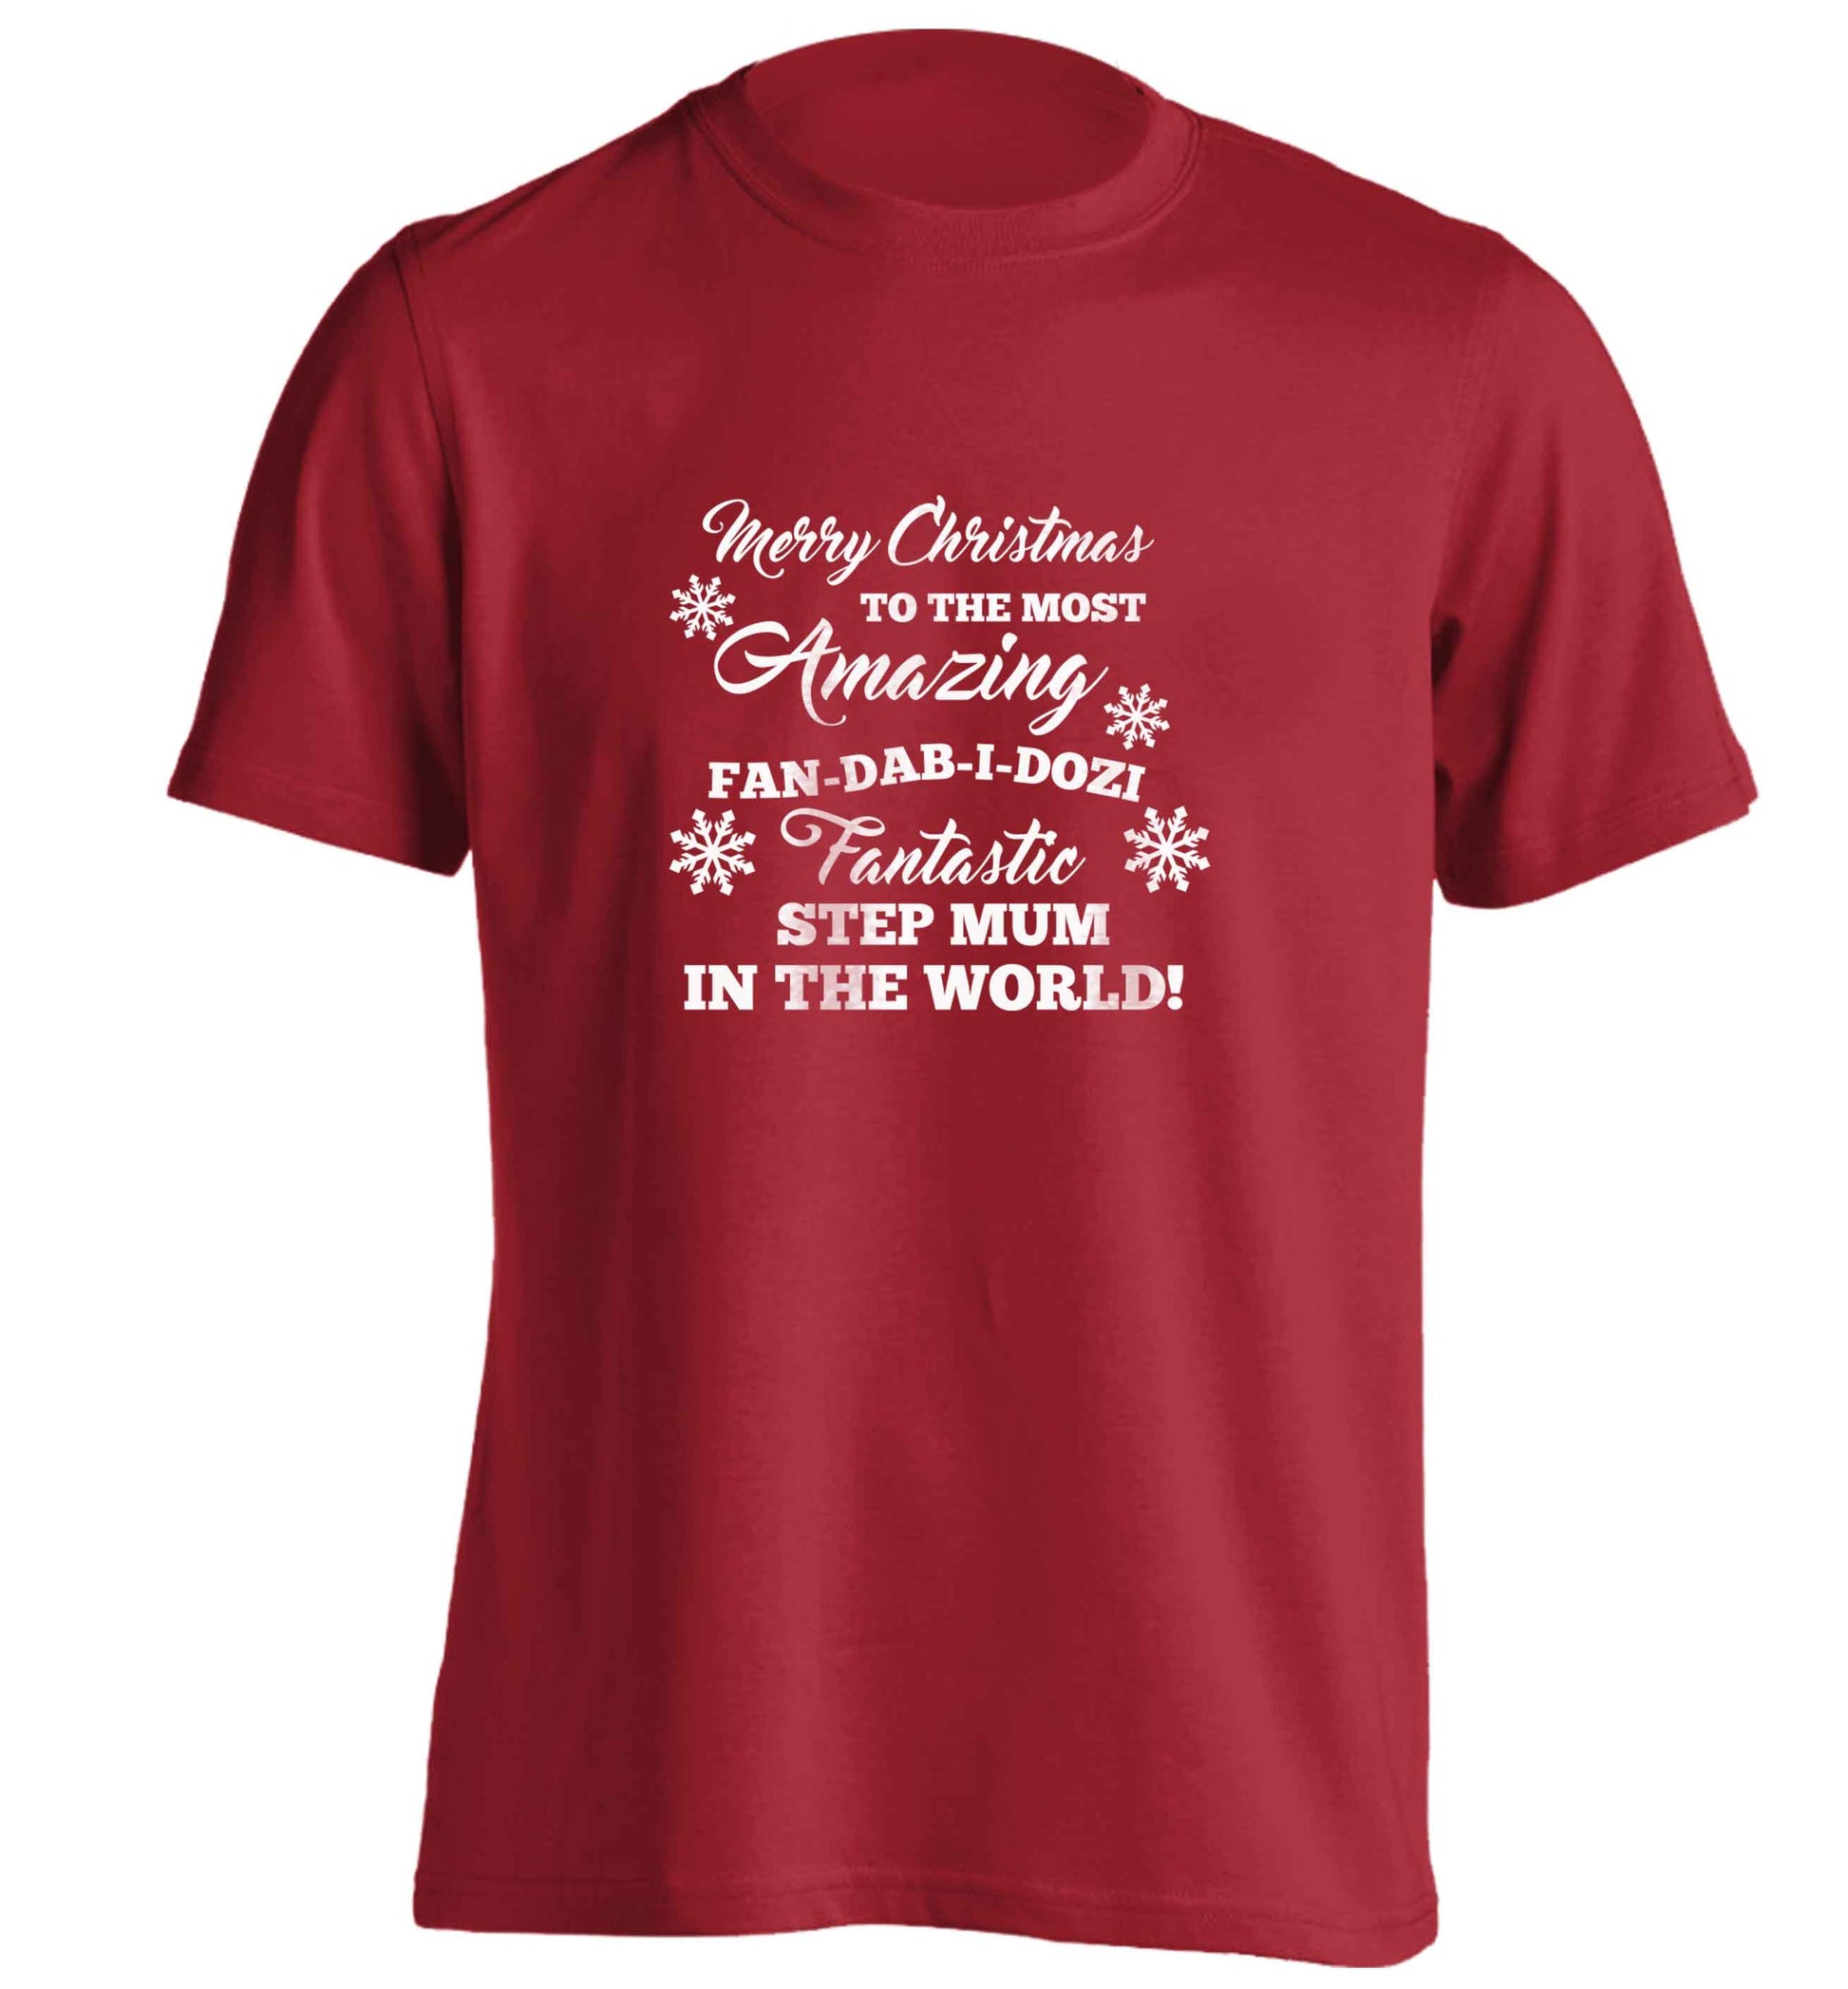 Merry Christmas to the most amazing fan-dab-i-dozi fantasic Step Mum in the world adults unisex red Tshirt 2XL